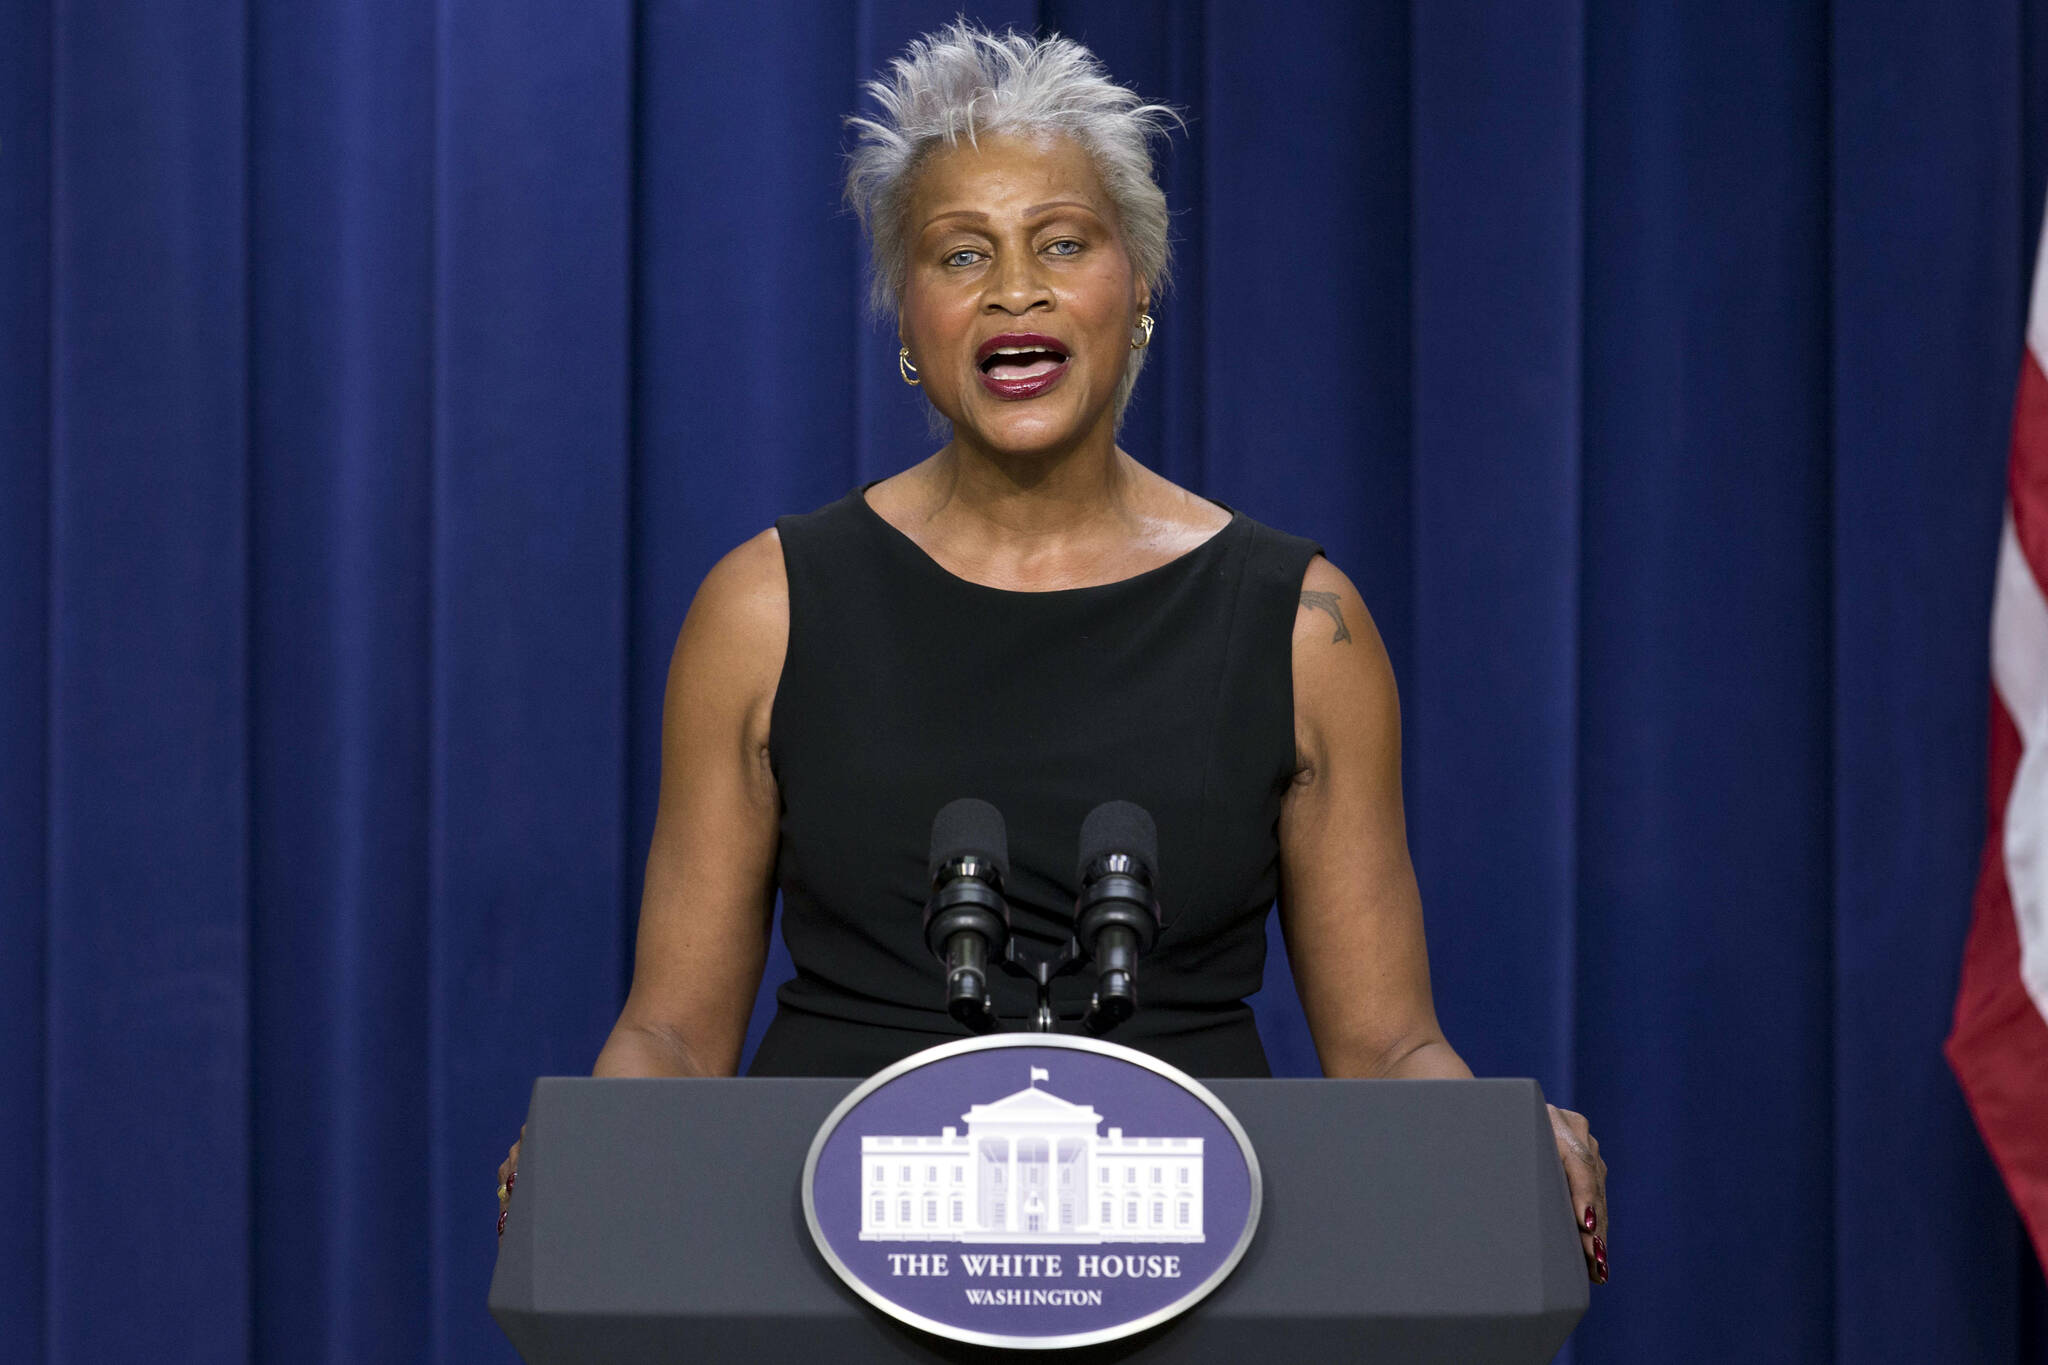 In this Sept. 16, 2015 file photo, Elvi Gray-Jackson, of Anchorage, Alaska, speaks at the White House complex in Washington as part of former first lady Michelle Obama’s Let’s Move! initiative. Gray-Jackson, a Democrat, announced Friday, March 25, 2022, that she is ending her run for U.S. Senate in Alaska and instead will seek reelection to the state Senate. (AP Photo/Carolyn Kaster, File)